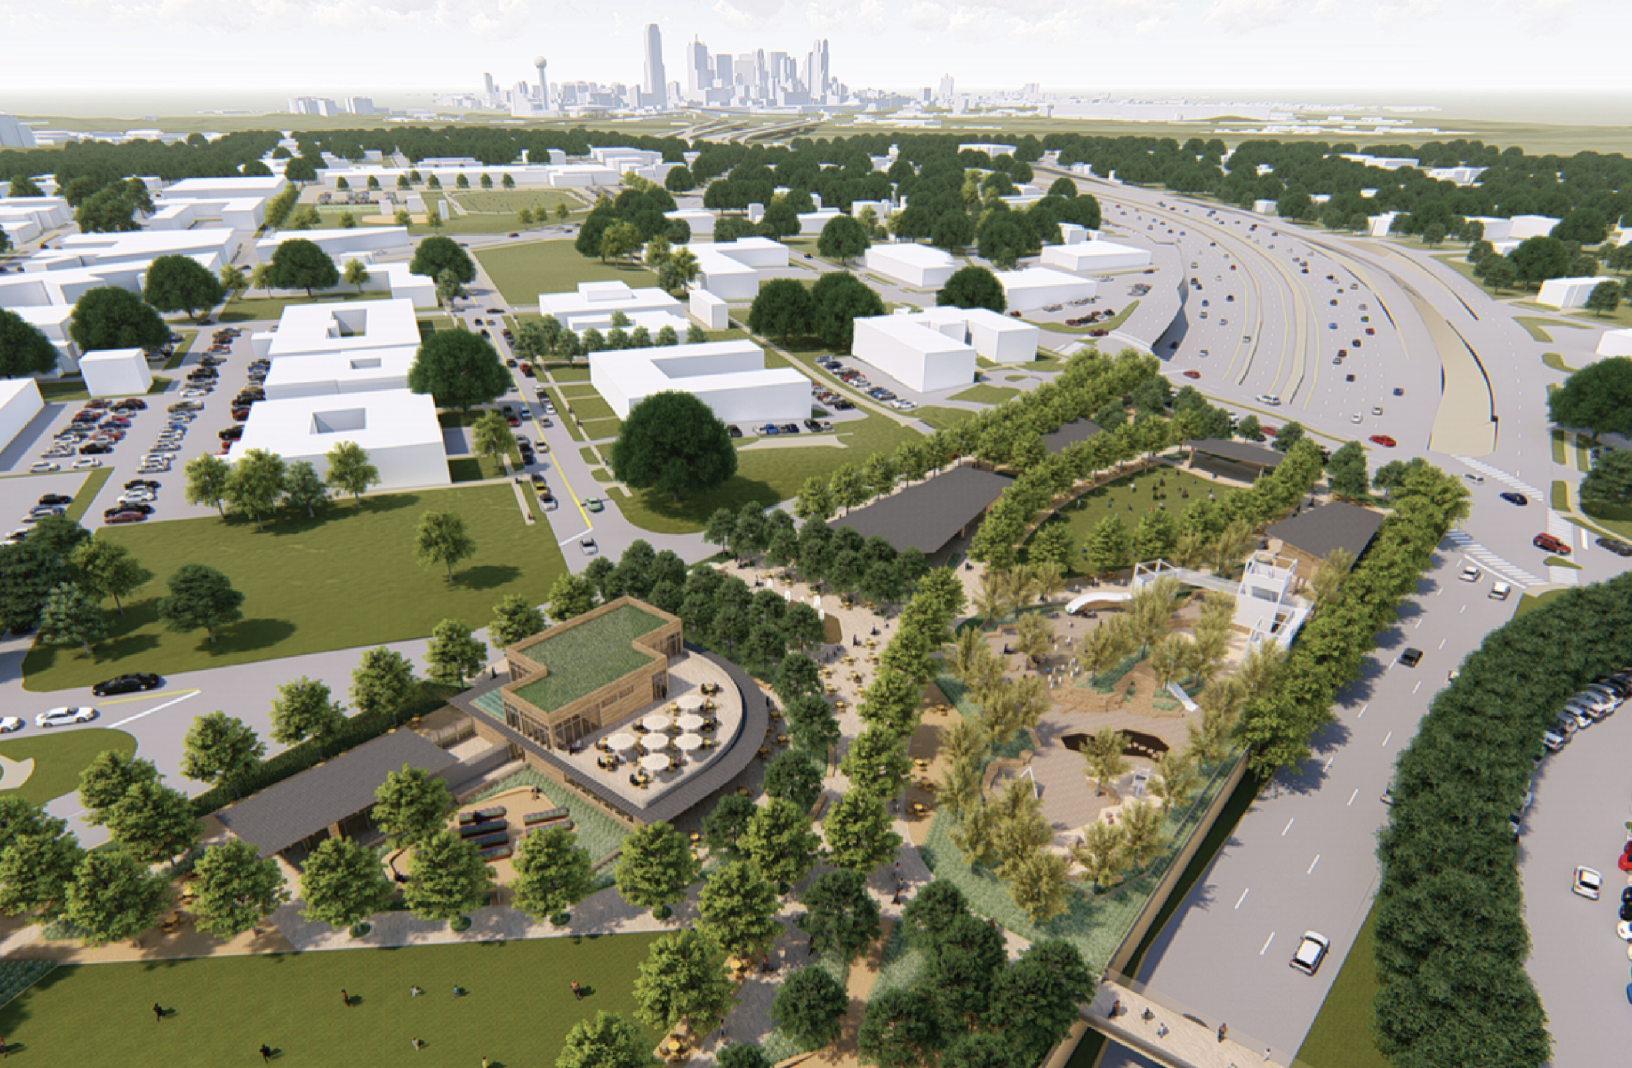 Park rendering provided by Southern Gateway Public Green Foundation.